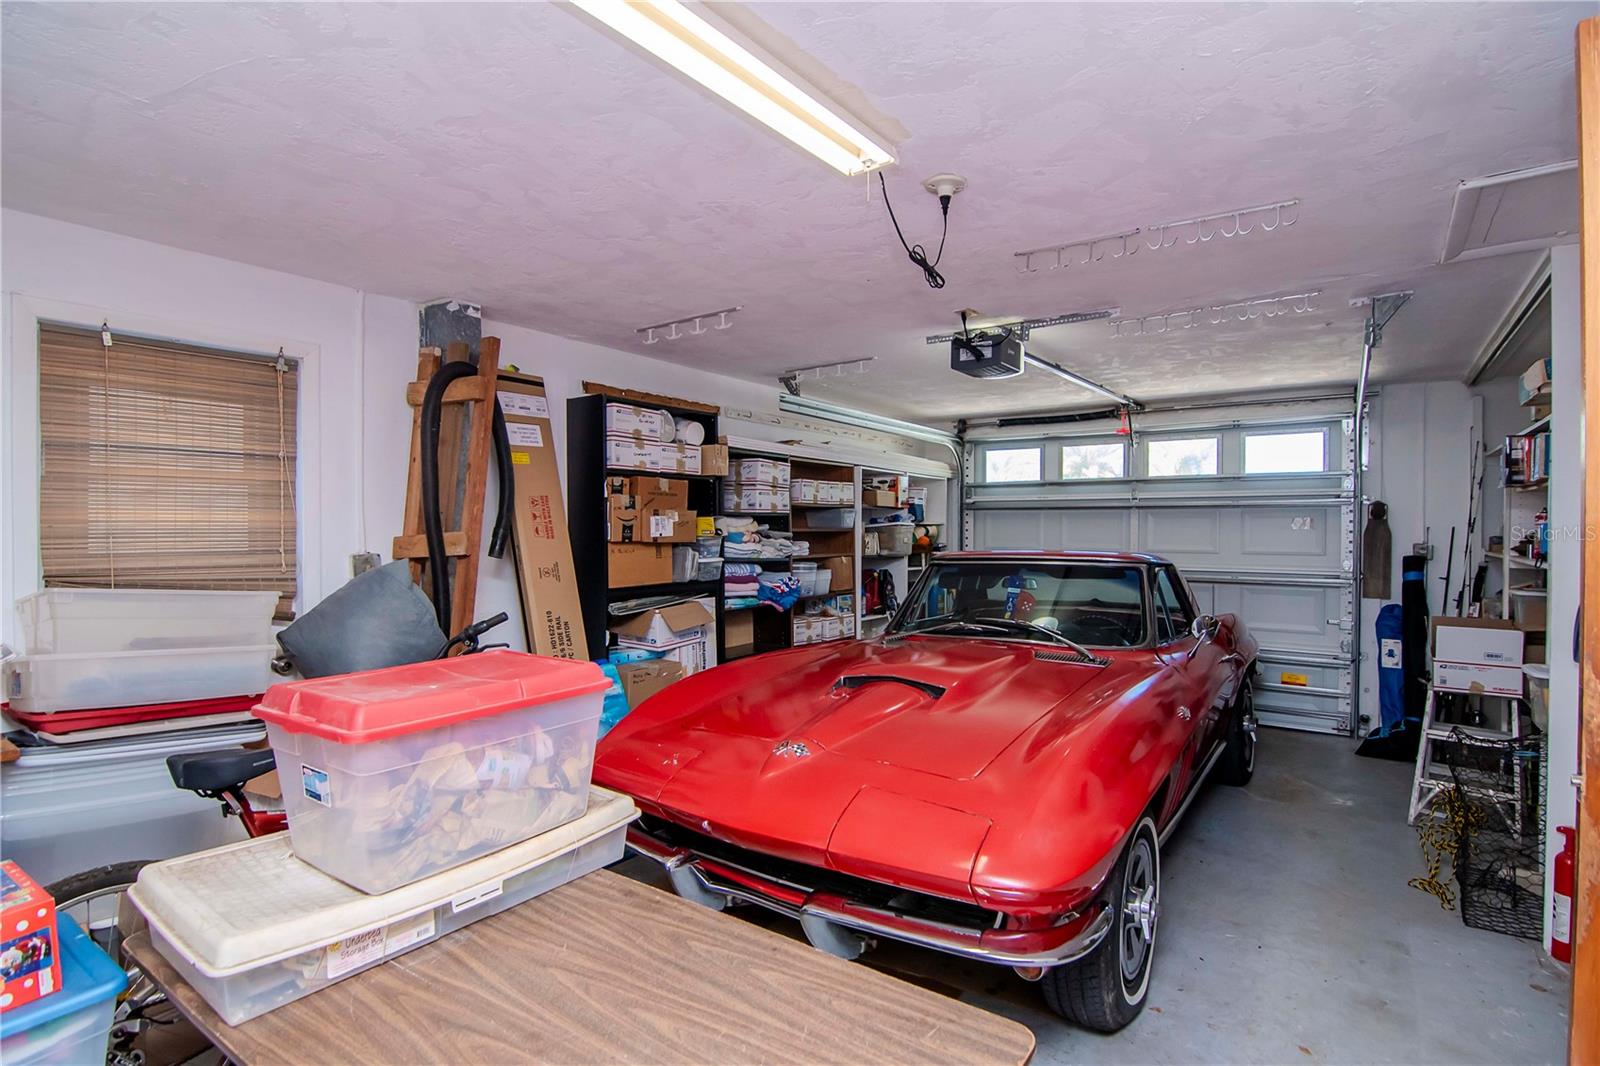 Room for storage in this 1 car garage, but sorry, Corvette is NOT included!